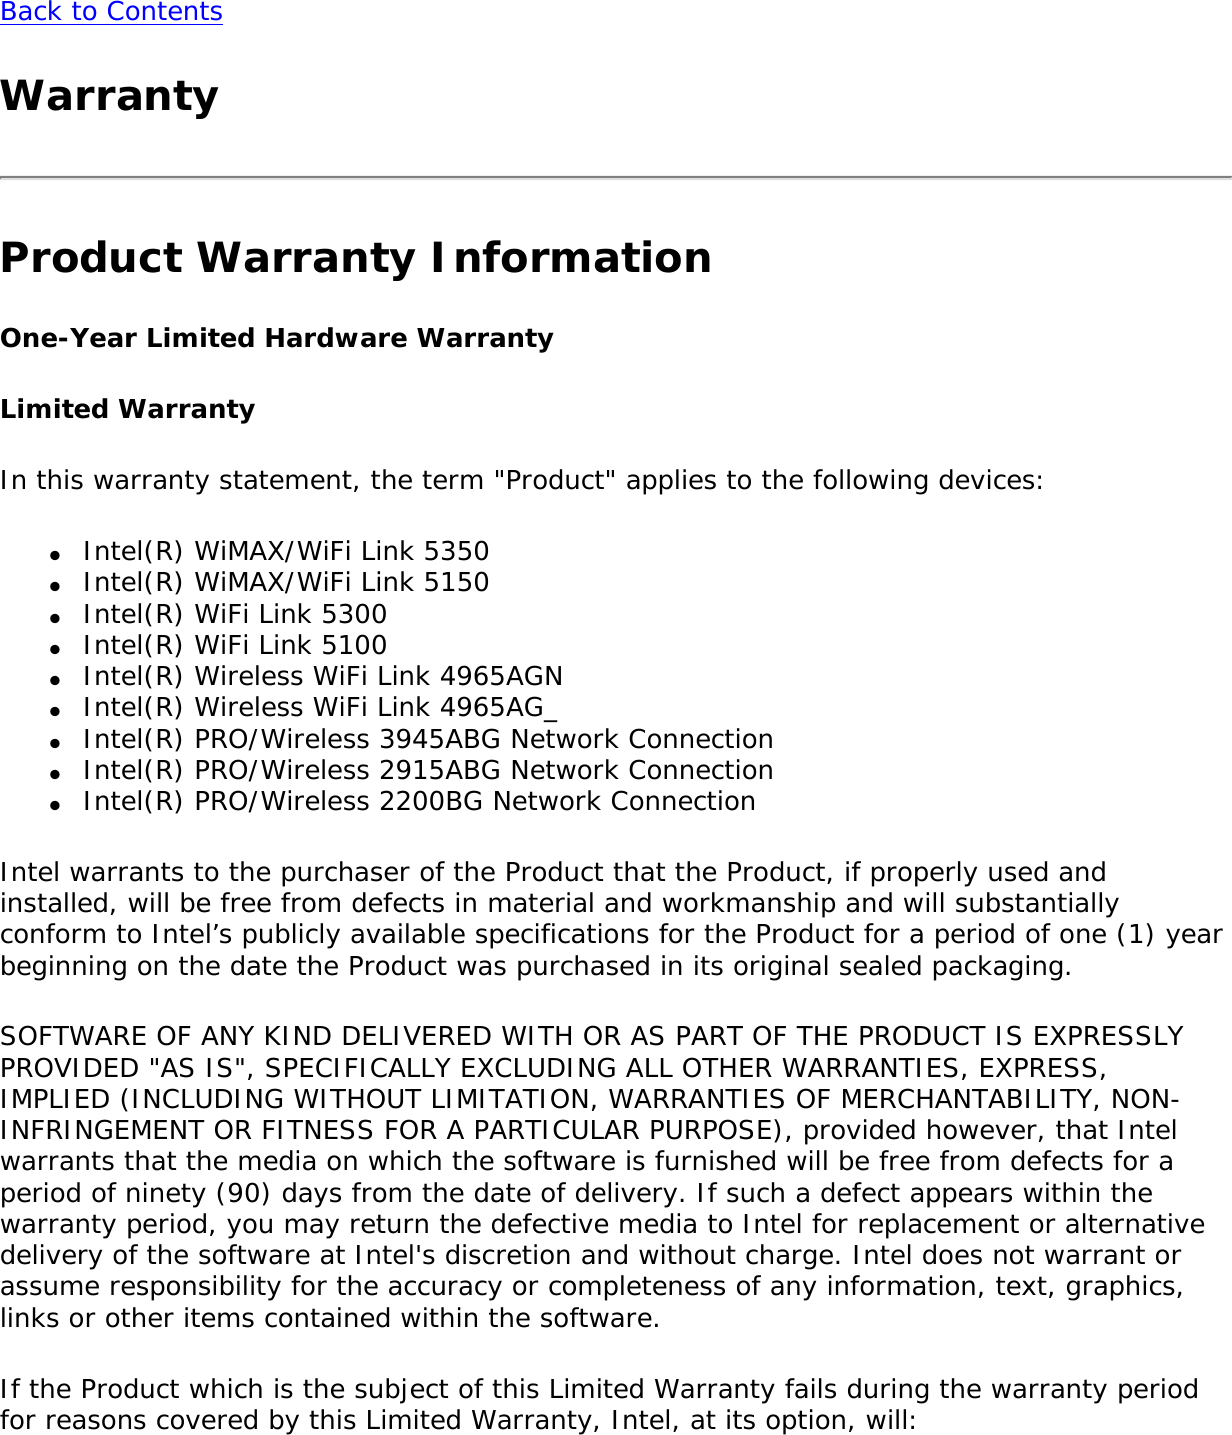 Back to ContentsWarrantyProduct Warranty InformationOne-Year Limited Hardware WarrantyLimited WarrantyIn this warranty statement, the term &quot;Product&quot; applies to the following devices:●     Intel(R) WiMAX/WiFi Link 5350●     Intel(R) WiMAX/WiFi Link 5150●     Intel(R) WiFi Link 5300●     Intel(R) WiFi Link 5100 ●     Intel(R) Wireless WiFi Link 4965AGN●     Intel(R) Wireless WiFi Link 4965AG_●     Intel(R) PRO/Wireless 3945ABG Network Connection●     Intel(R) PRO/Wireless 2915ABG Network Connection●     Intel(R) PRO/Wireless 2200BG Network ConnectionIntel warrants to the purchaser of the Product that the Product, if properly used and installed, will be free from defects in material and workmanship and will substantially conform to Intel’s publicly available specifications for the Product for a period of one (1) year beginning on the date the Product was purchased in its original sealed packaging.SOFTWARE OF ANY KIND DELIVERED WITH OR AS PART OF THE PRODUCT IS EXPRESSLY PROVIDED &quot;AS IS&quot;, SPECIFICALLY EXCLUDING ALL OTHER WARRANTIES, EXPRESS, IMPLIED (INCLUDING WITHOUT LIMITATION, WARRANTIES OF MERCHANTABILITY, NON-INFRINGEMENT OR FITNESS FOR A PARTICULAR PURPOSE), provided however, that Intel warrants that the media on which the software is furnished will be free from defects for a period of ninety (90) days from the date of delivery. If such a defect appears within the warranty period, you may return the defective media to Intel for replacement or alternative delivery of the software at Intel&apos;s discretion and without charge. Intel does not warrant or assume responsibility for the accuracy or completeness of any information, text, graphics, links or other items contained within the software.If the Product which is the subject of this Limited Warranty fails during the warranty period for reasons covered by this Limited Warranty, Intel, at its option, will: